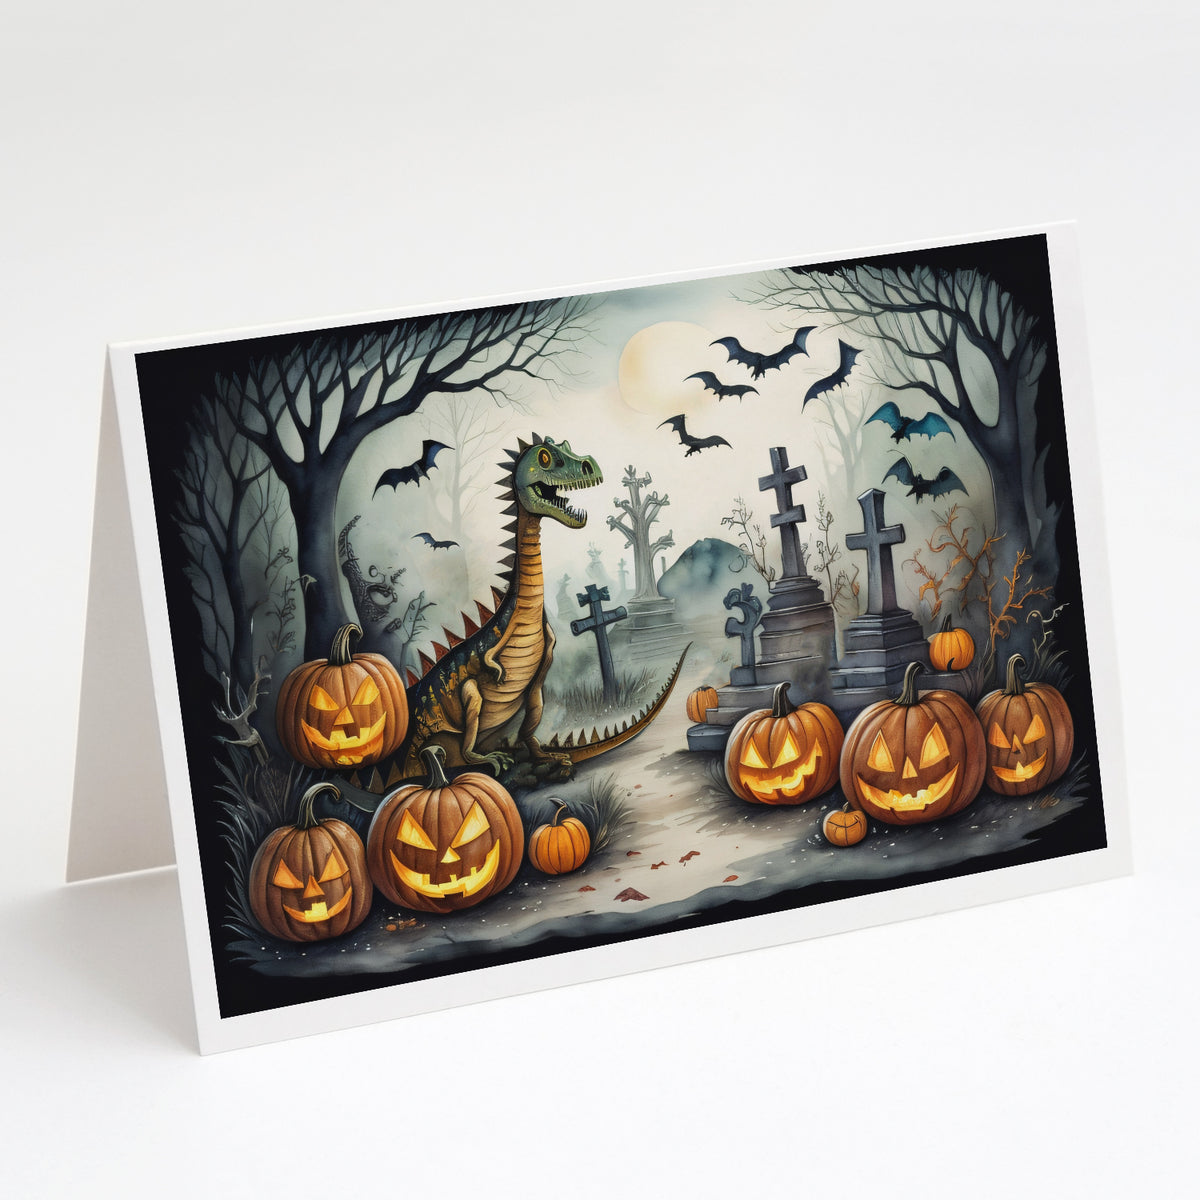 Buy this Dinosaurs Spooky Halloween Greeting Cards and Envelopes Pack of 8